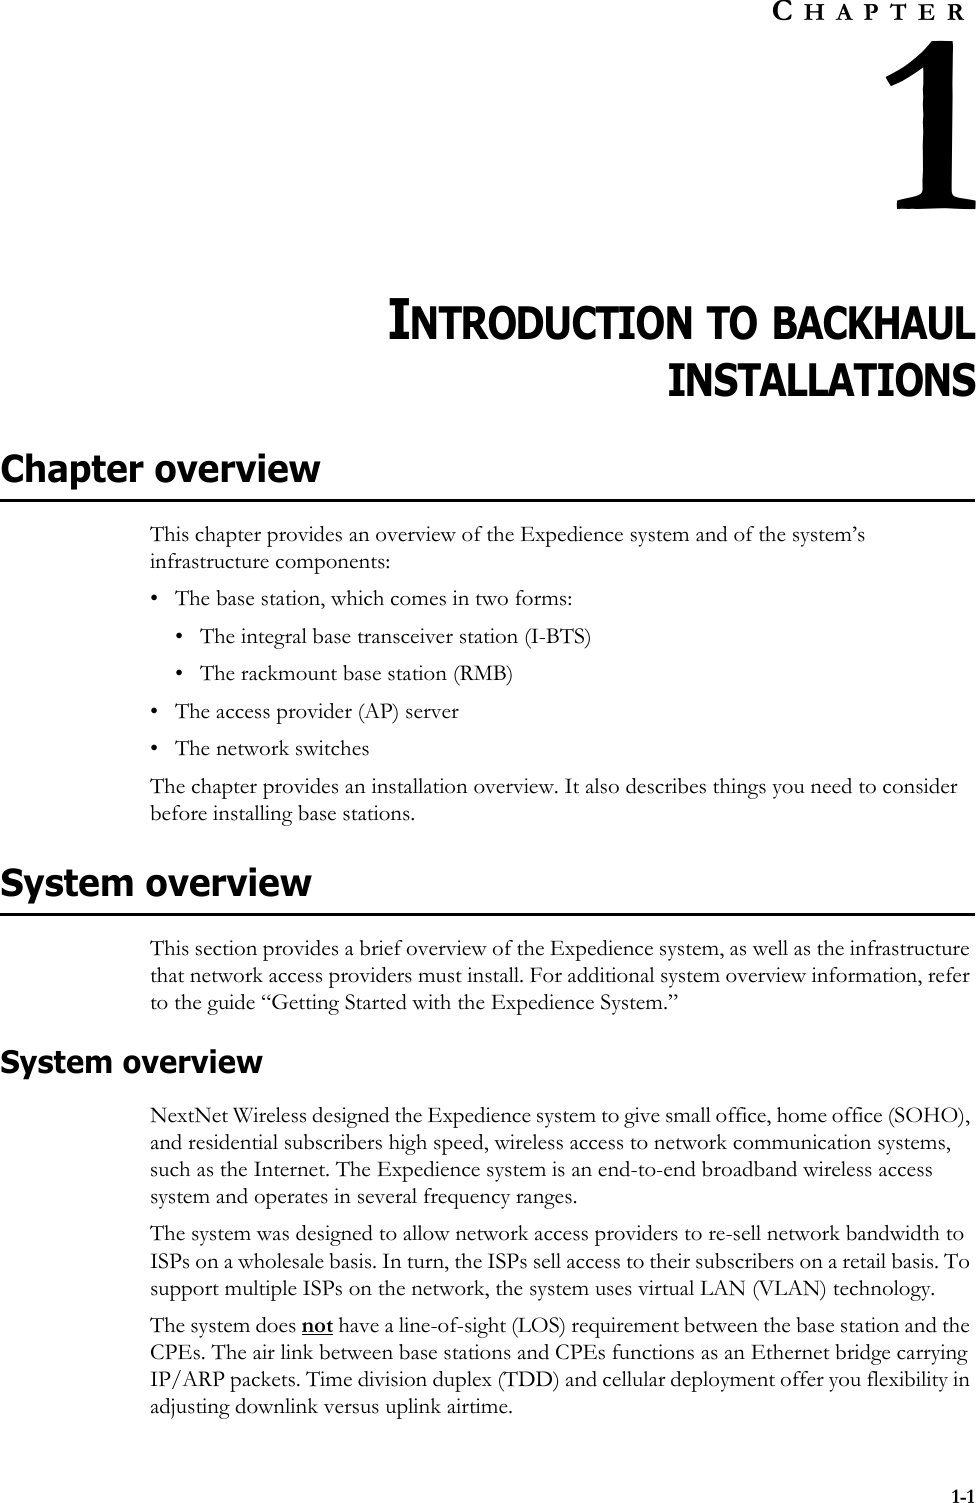 1-1CHAPTER1INTRODUCTION TO BACKHAULINSTALLATIONSChapter overviewThis chapter provides an overview of the Expedience system and of the system’s infrastructure components: • The base station, which comes in two forms:• The integral base transceiver station (I-BTS)• The rackmount base station (RMB)• The access provider (AP) server• The network switchesThe chapter provides an installation overview. It also describes things you need to consider before installing base stations. System overviewThis section provides a brief overview of the Expedience system, as well as the infrastructure that network access providers must install. For additional system overview information, refer to the guide “Getting Started with the Expedience System.”System overviewNextNet Wireless designed the Expedience system to give small office, home office (SOHO), and residential subscribers high speed, wireless access to network communication systems, such as the Internet. The Expedience system is an end-to-end broadband wireless access system and operates in several frequency ranges. The system was designed to allow network access providers to re-sell network bandwidth to ISPs on a wholesale basis. In turn, the ISPs sell access to their subscribers on a retail basis. To support multiple ISPs on the network, the system uses virtual LAN (VLAN) technology. The system does not have a line-of-sight (LOS) requirement between the base station and the CPEs. The air link between base stations and CPEs functions as an Ethernet bridge carrying IP/ARP packets. Time division duplex (TDD) and cellular deployment offer you flexibility in adjusting downlink versus uplink airtime. 